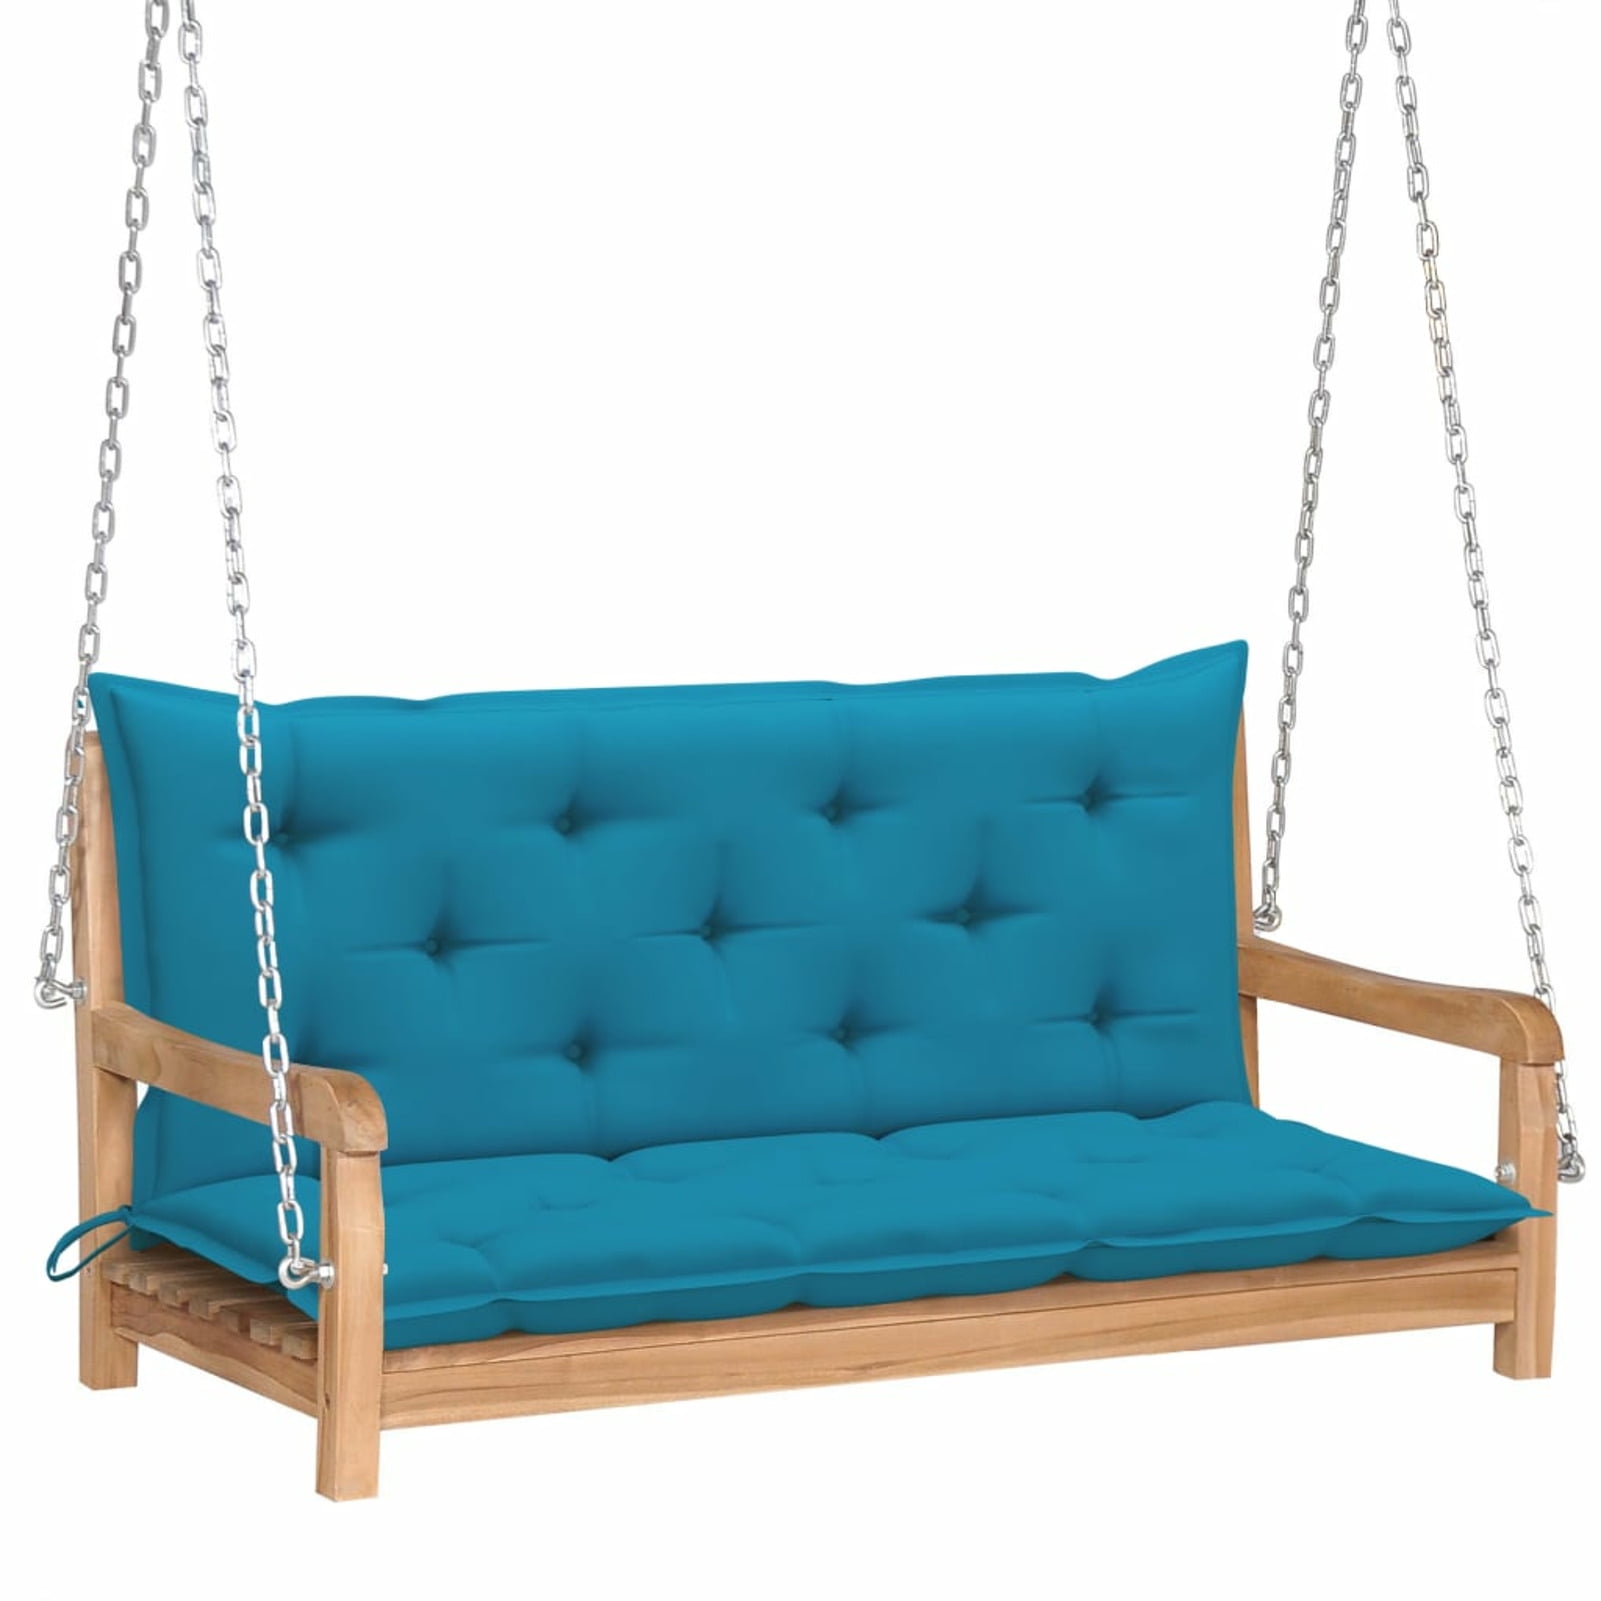 cushion Blue owl Wooden Toddler Swing T02 